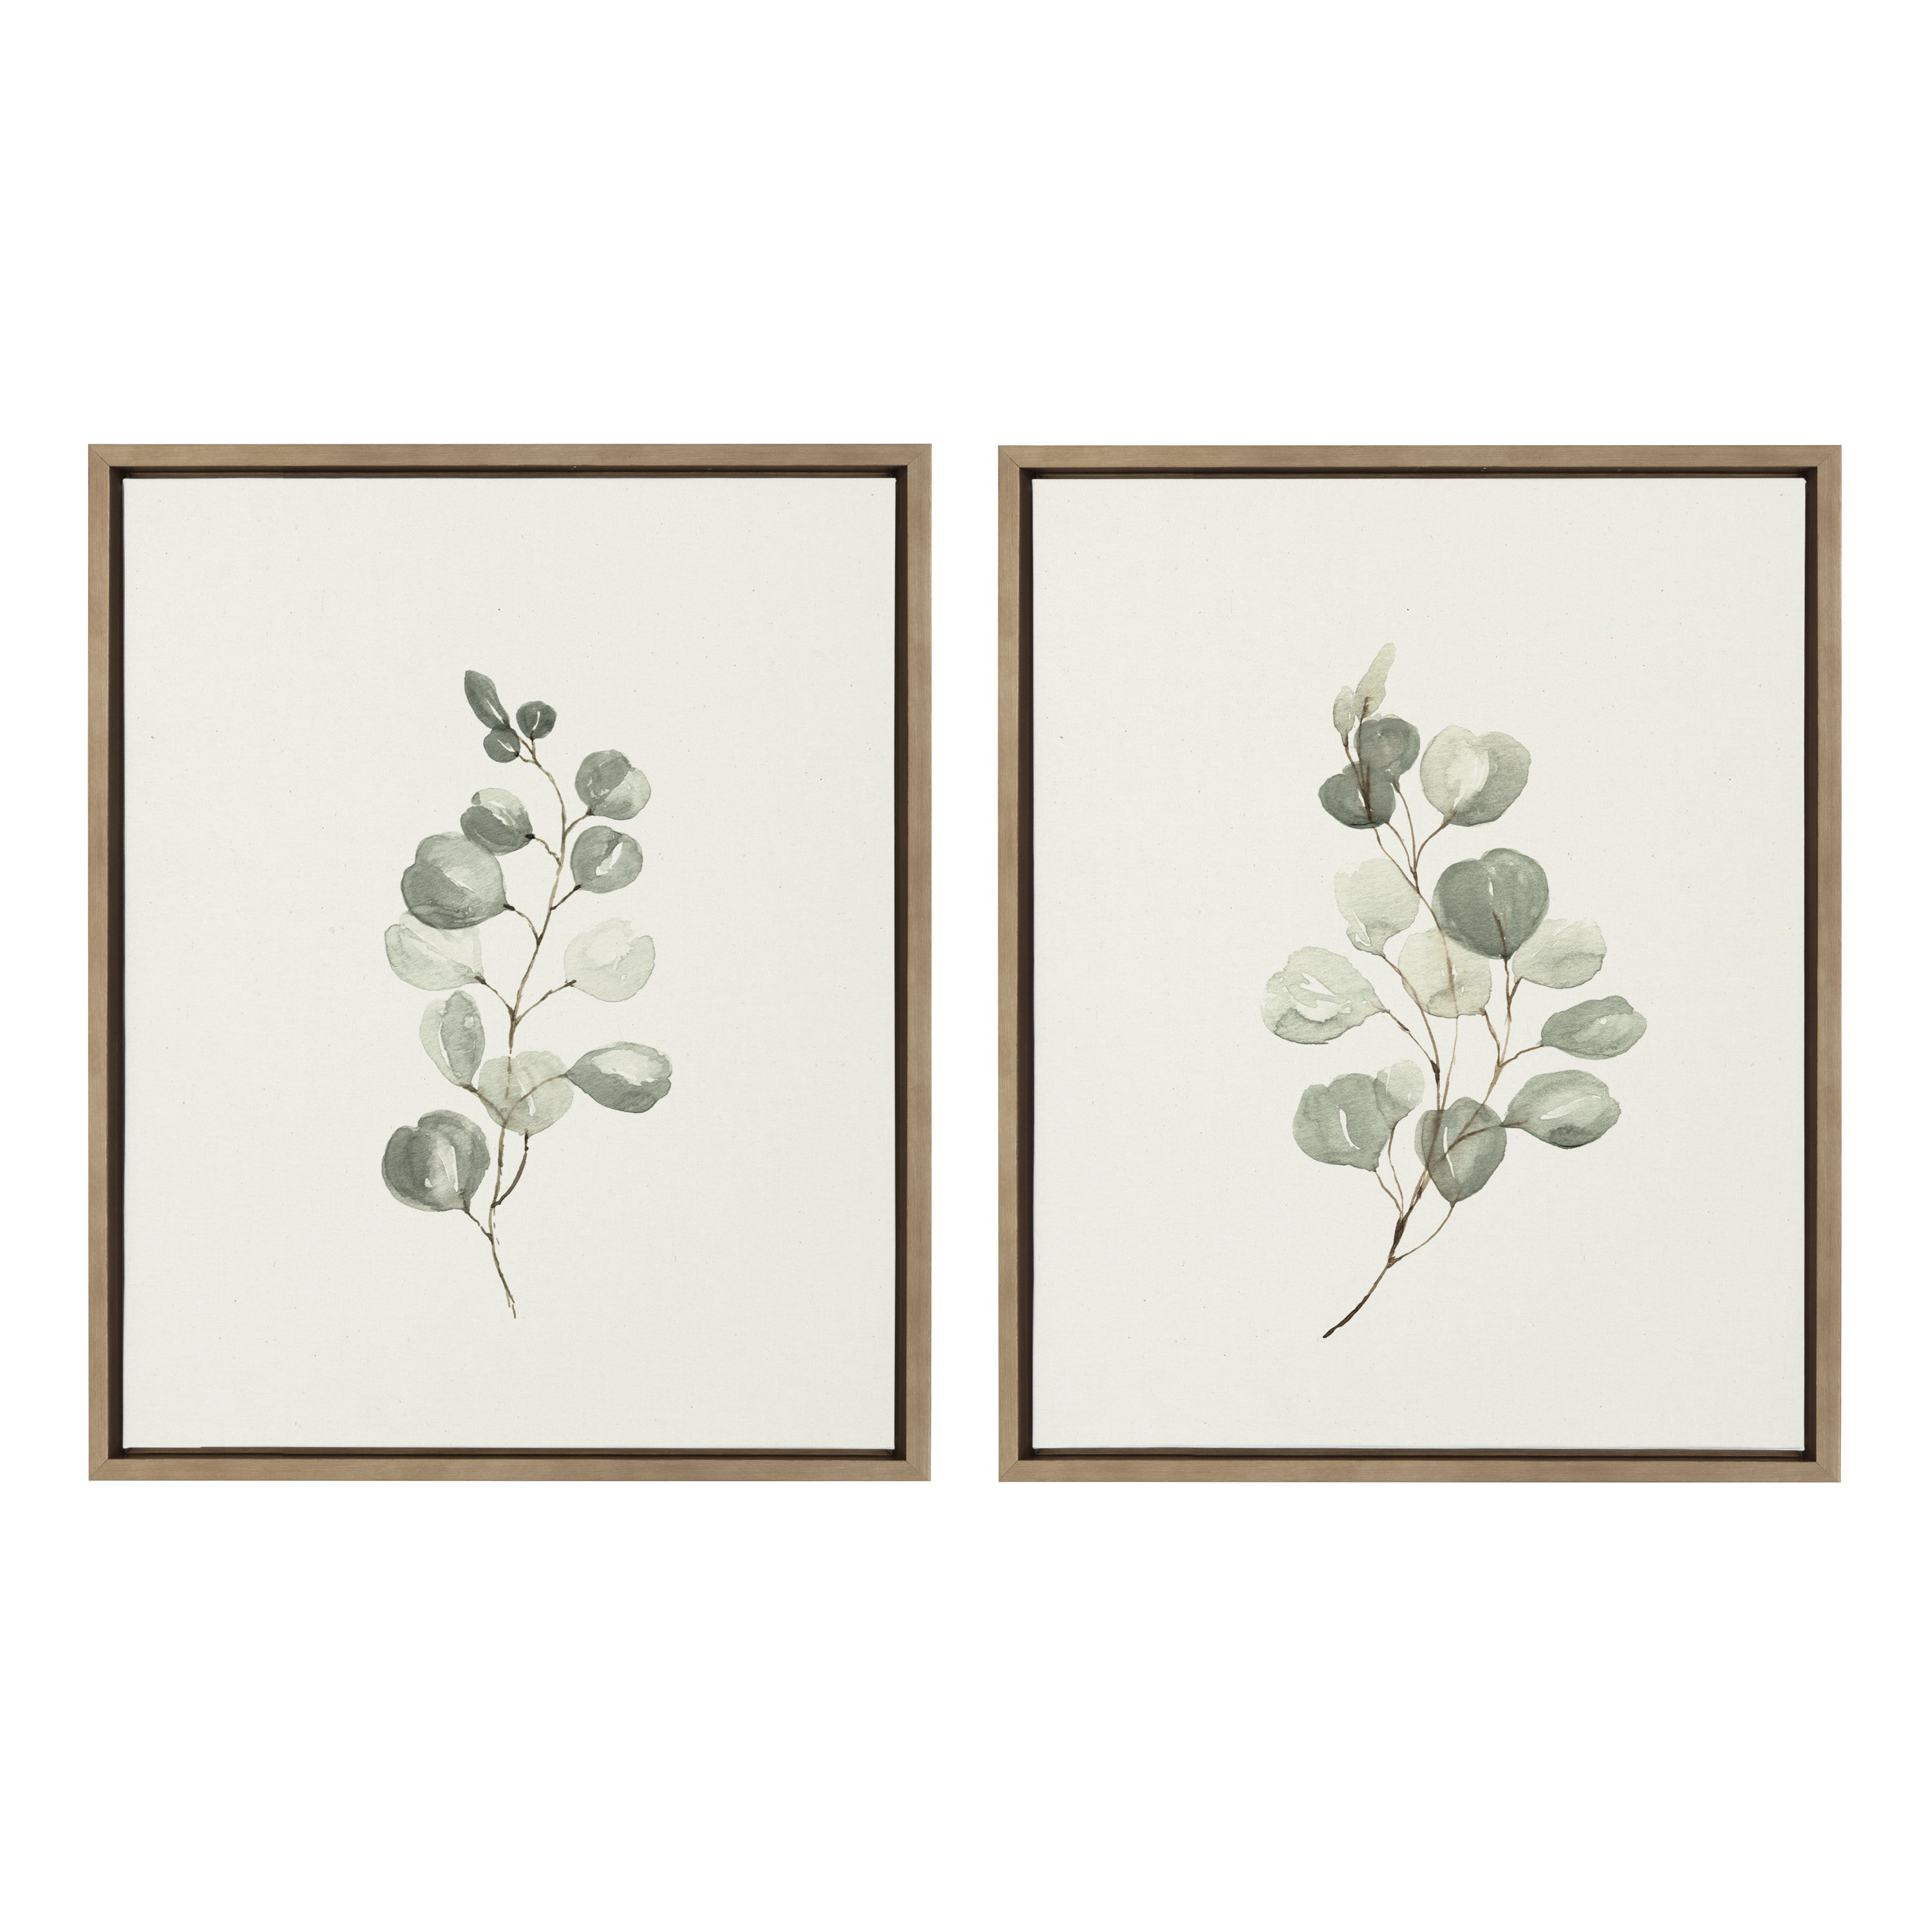 Kate and Laurel Sylvie Eucalyptus Framed Linen Textured Canvas Wall Art Set  by Maja Mitrovic of Makes My Day Happy, 18x24 Gold, Decorative Botanical Art  for Wall